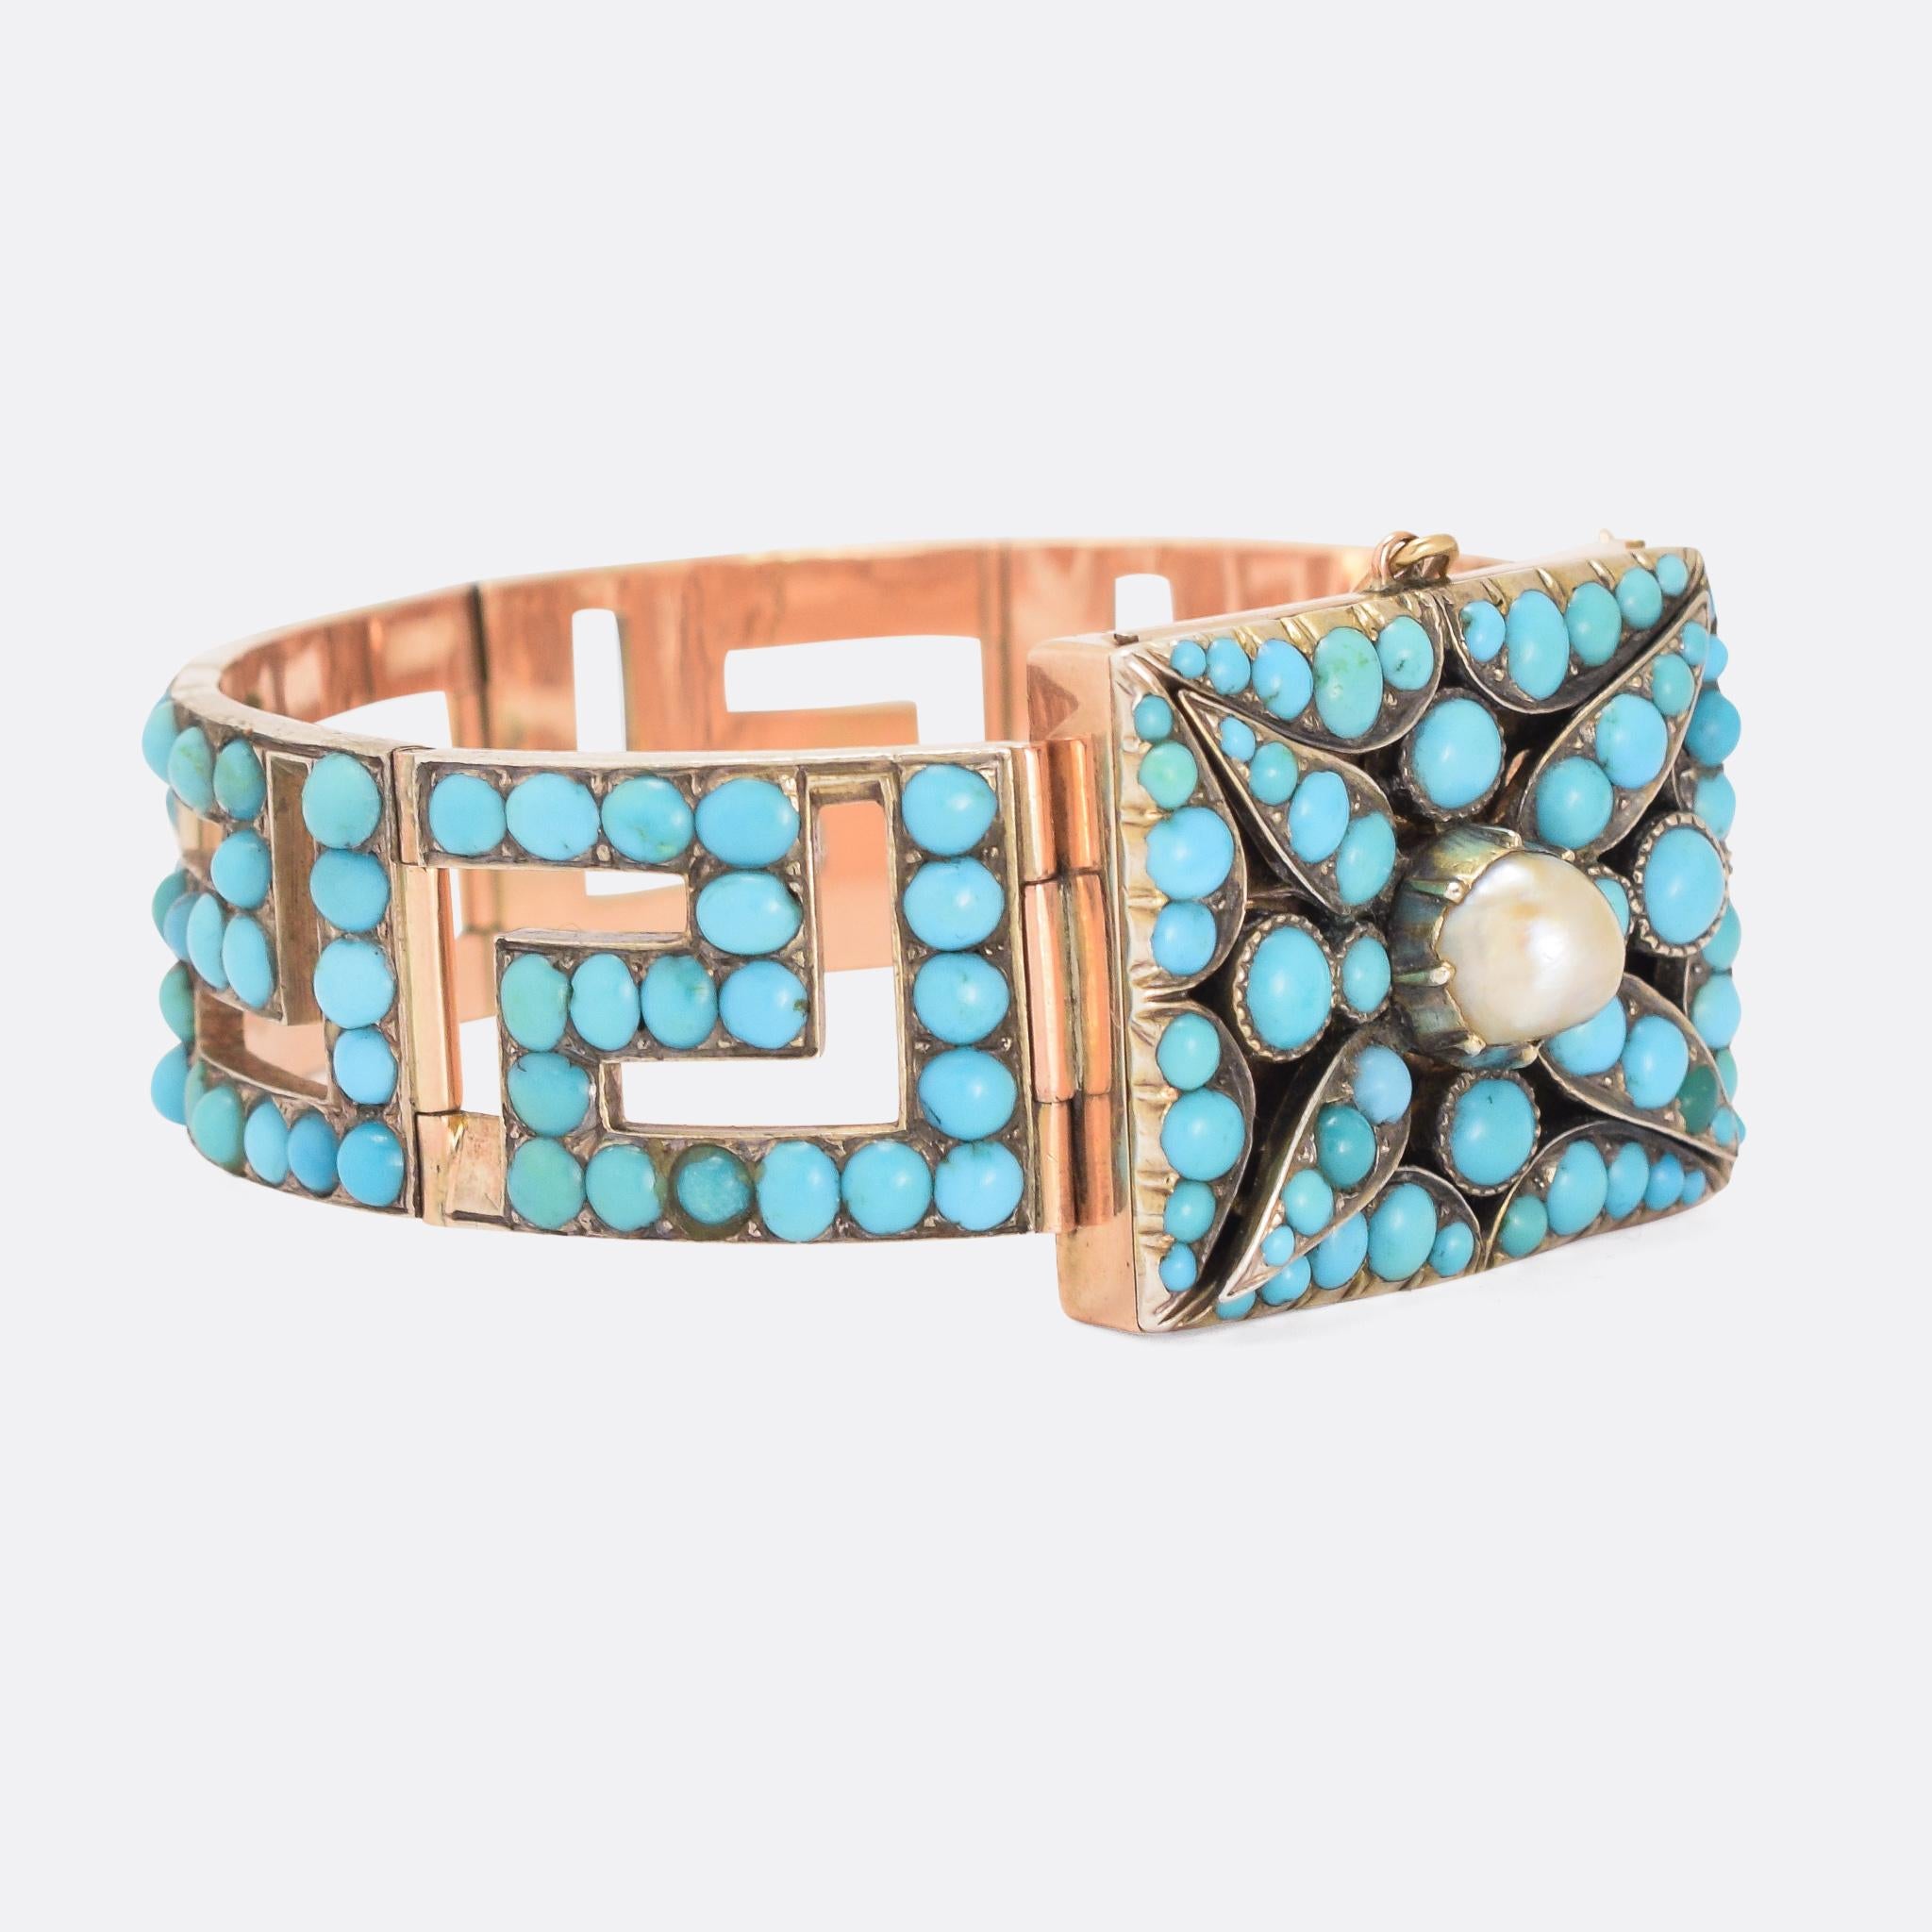 An incredible mid Victorian bracelet set with Persian turquoise and pearl. The rectangular head is formed as a stylised flower, with pearl centrepiece, and the band features an openworked Greek Key motif all the way around. It's a bold, substantial